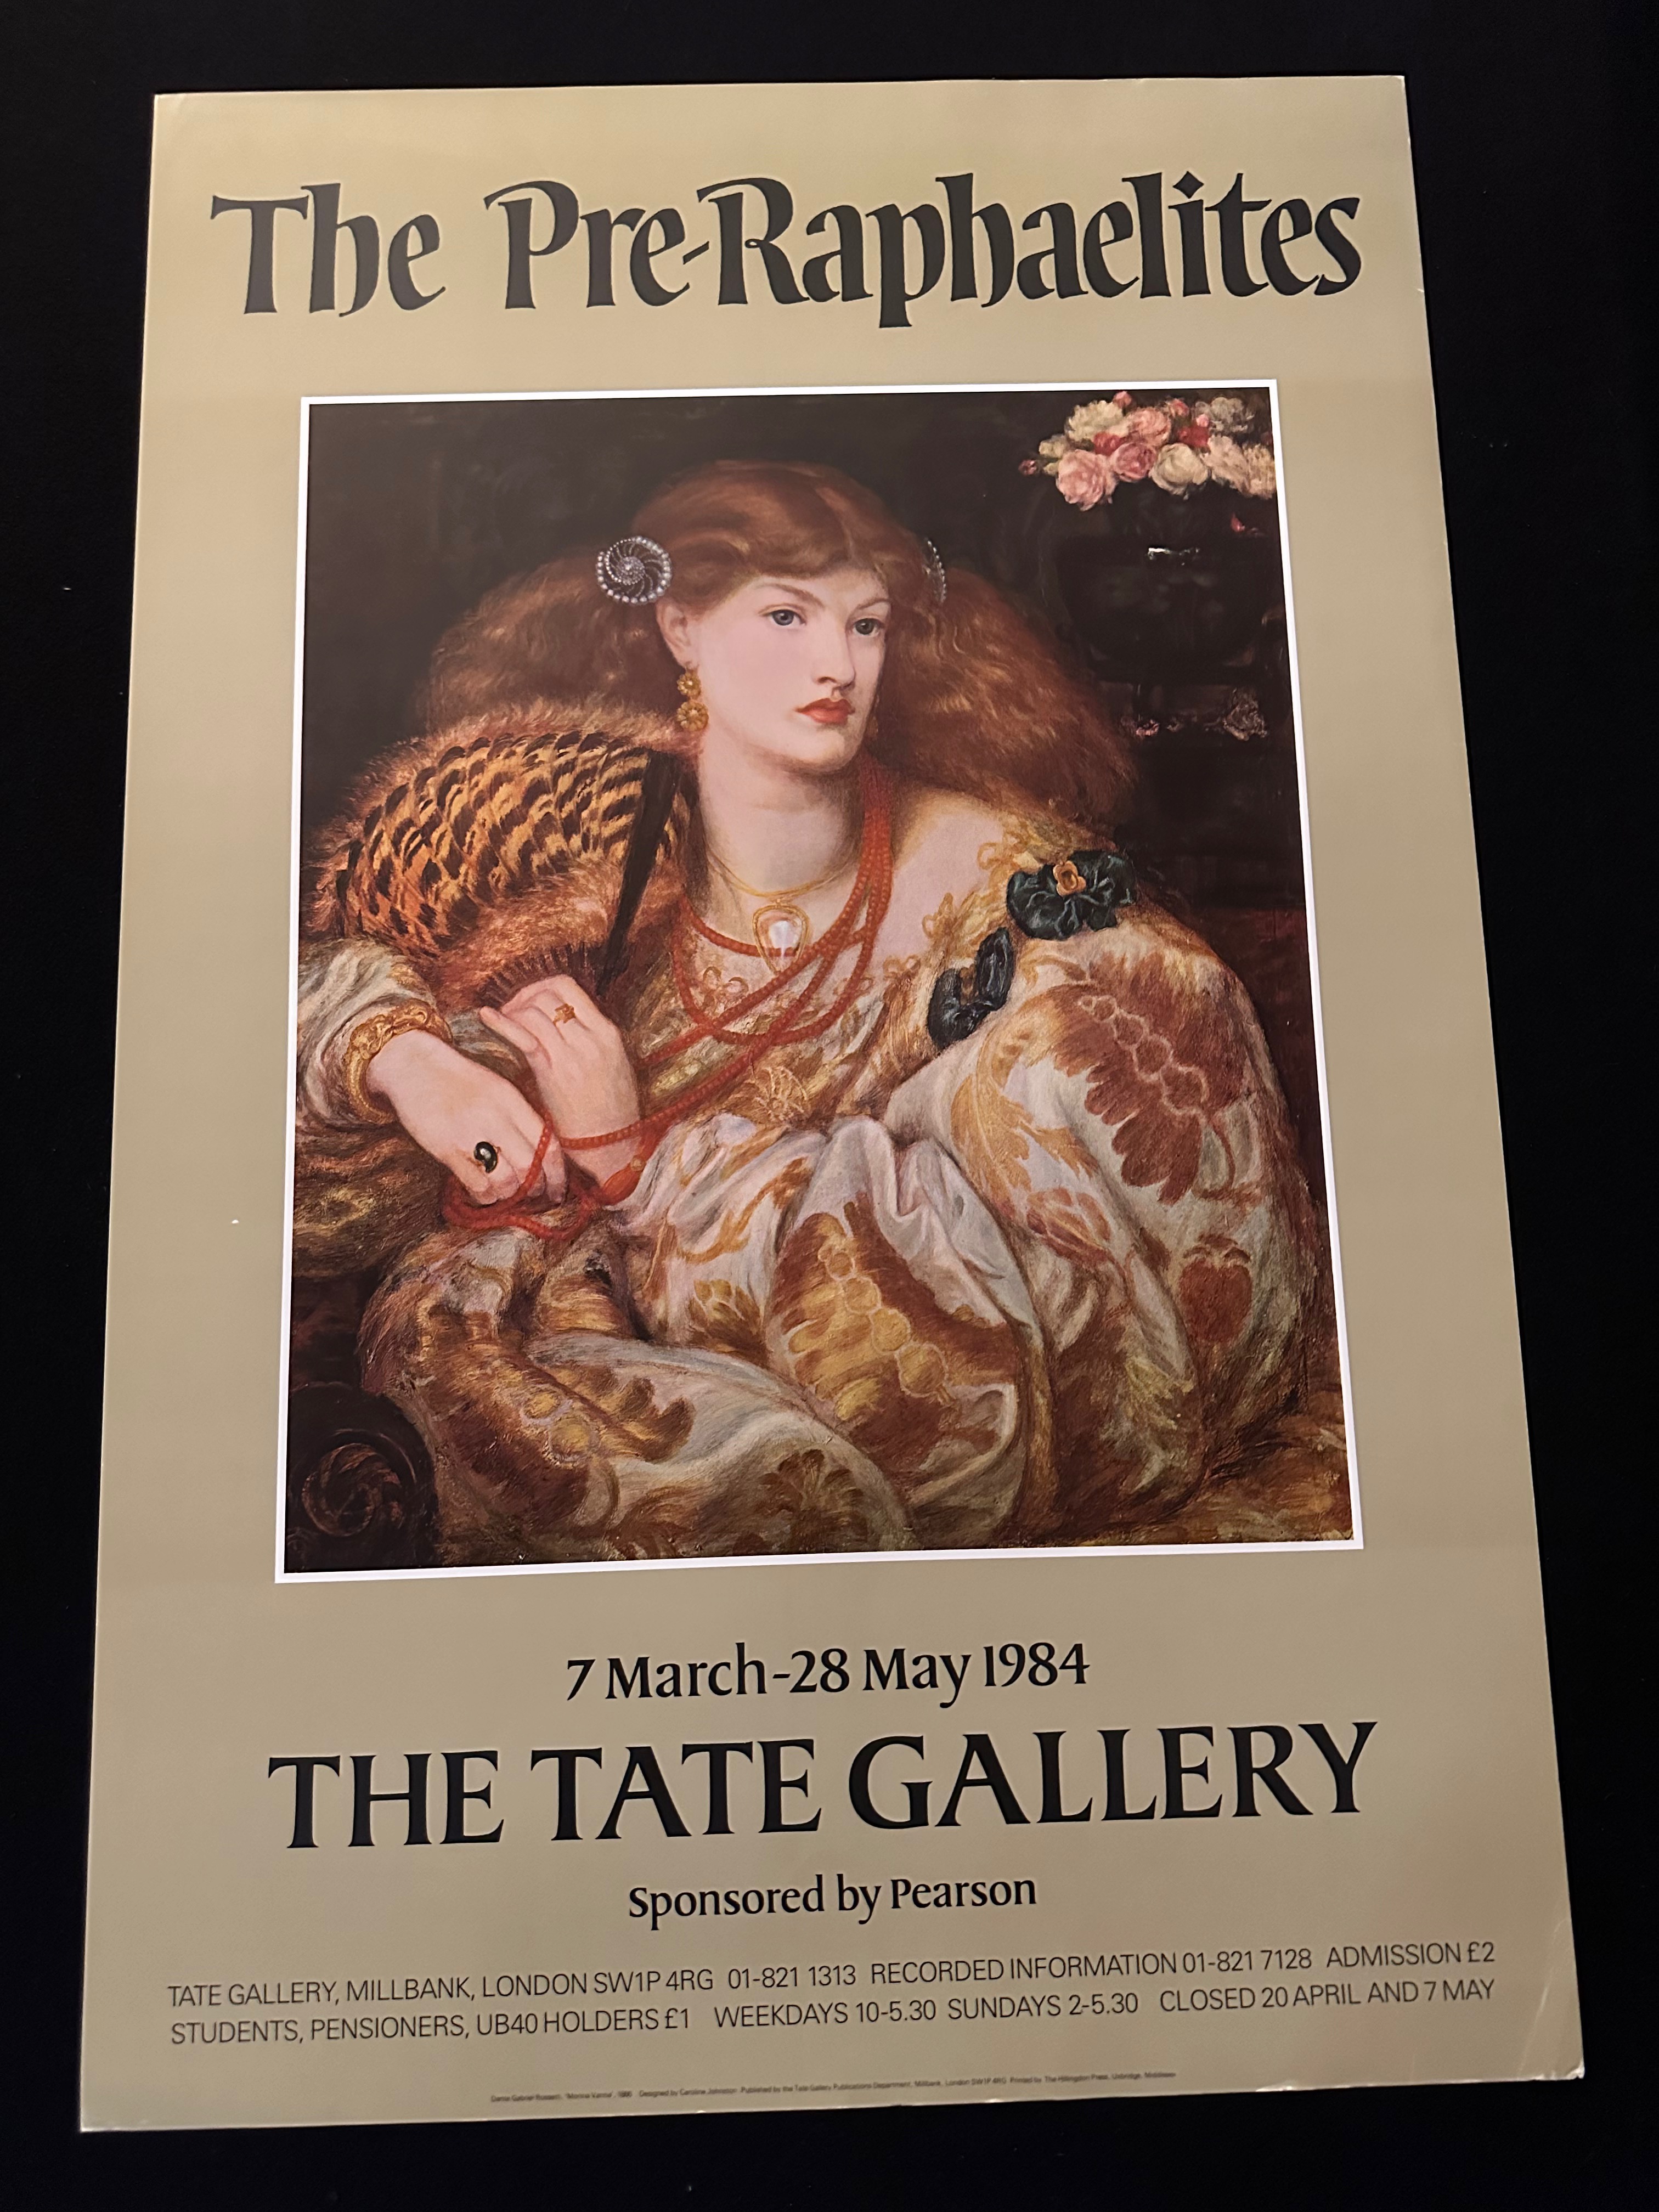 Two x The Pre-Raphaelites, The Tate Gallery Exhibition Poster 1984 - Image 2 of 2